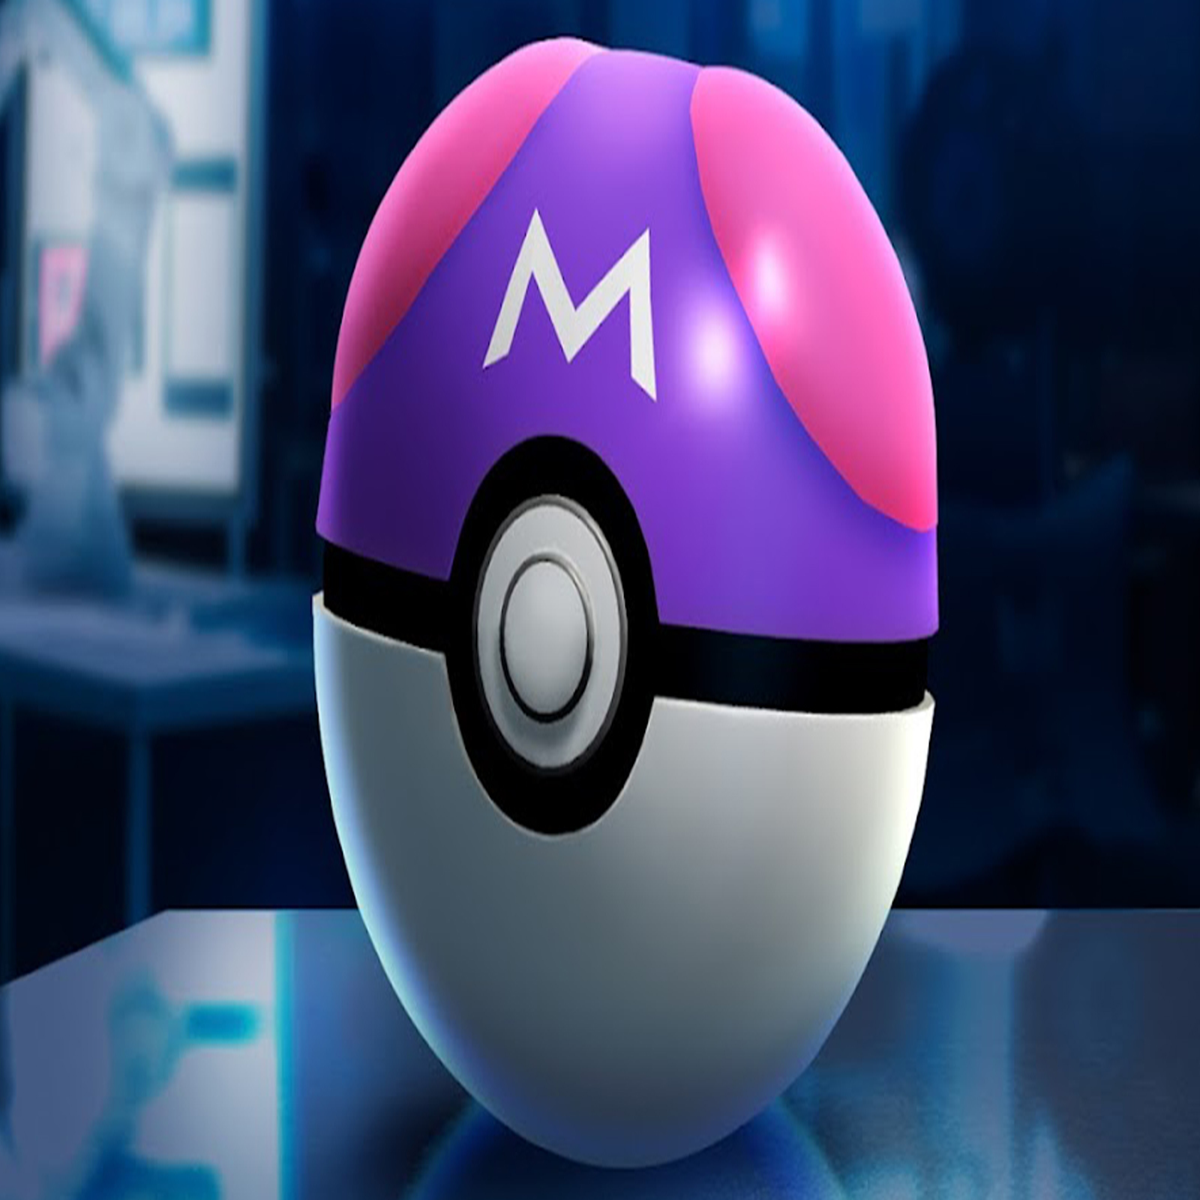 https://assetsio.gnwcdn.com/Pokemon-Go-Master-Ball-Header.jpg?width=1200&height=1200&fit=crop&quality=100&format=png&enable=upscale&auto=webp